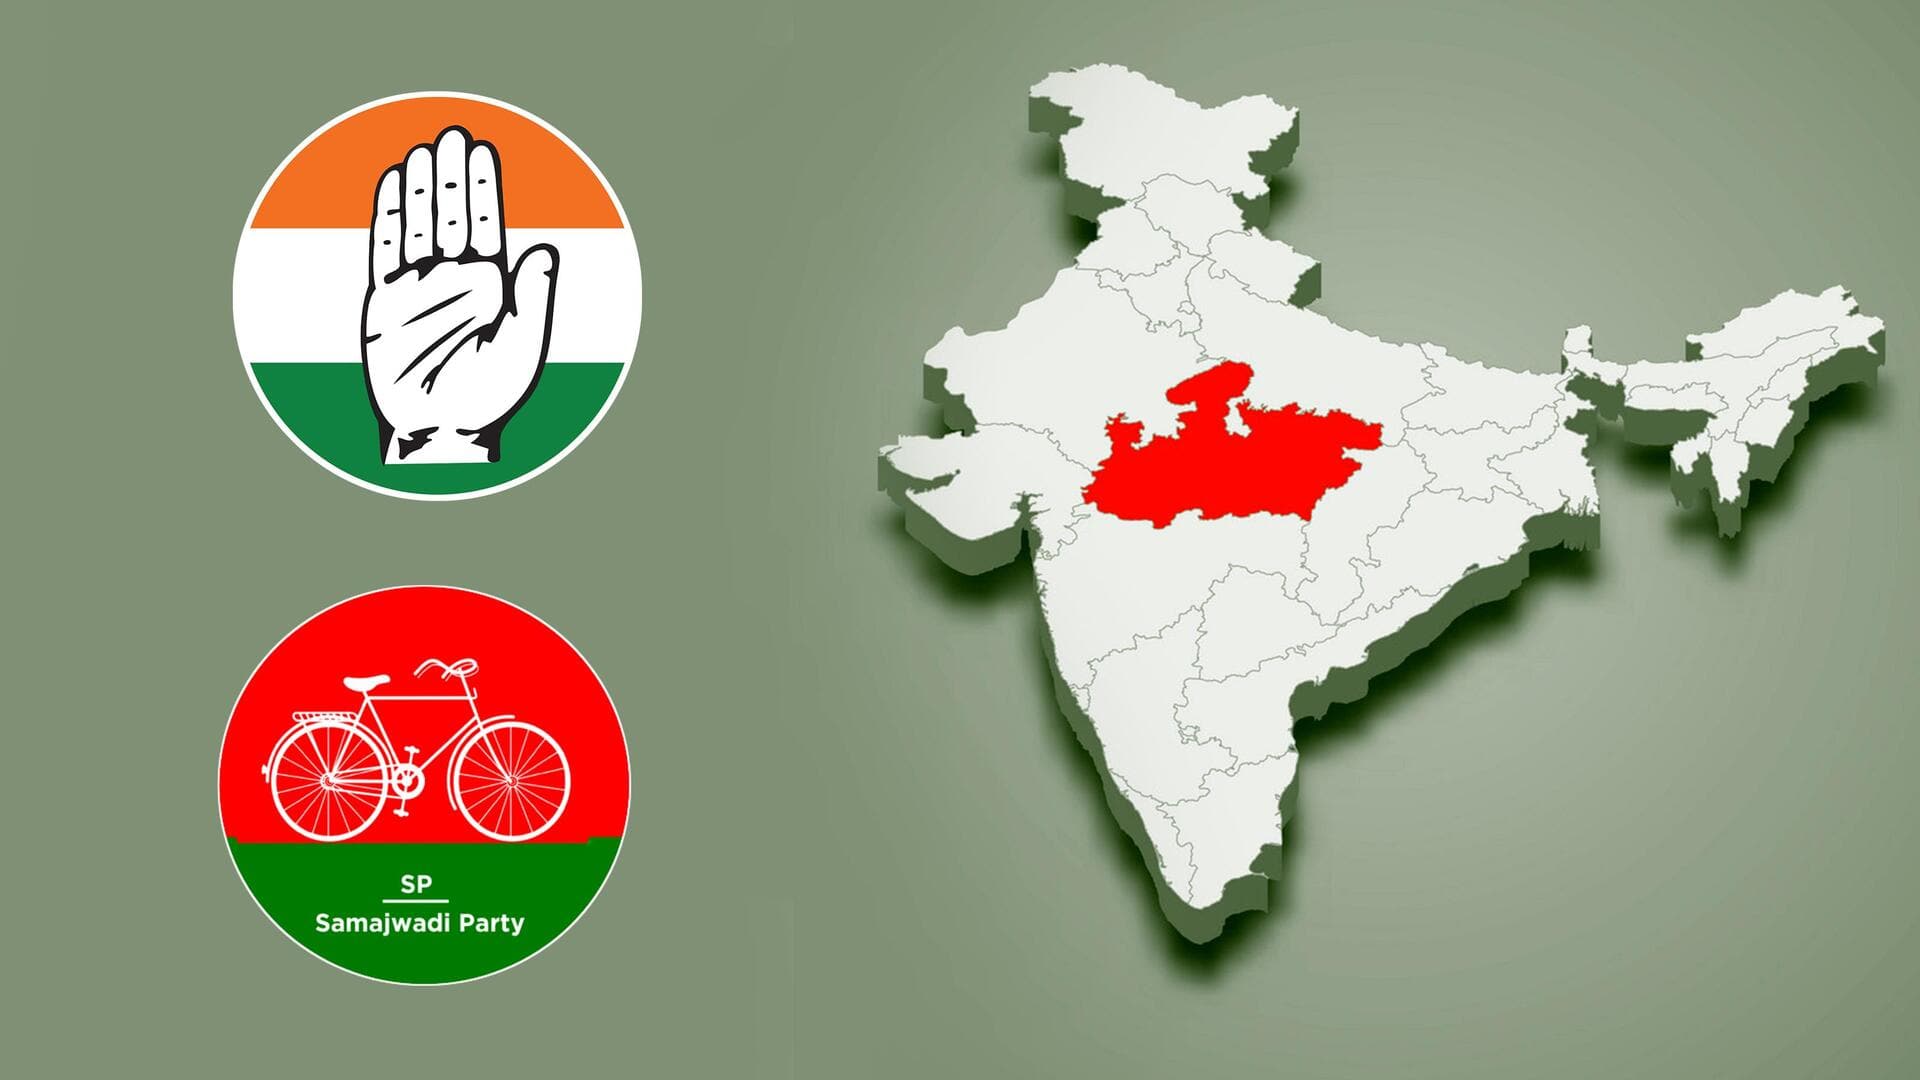 No SP, Congress seat-sharing agreement in MP assembly election: Report